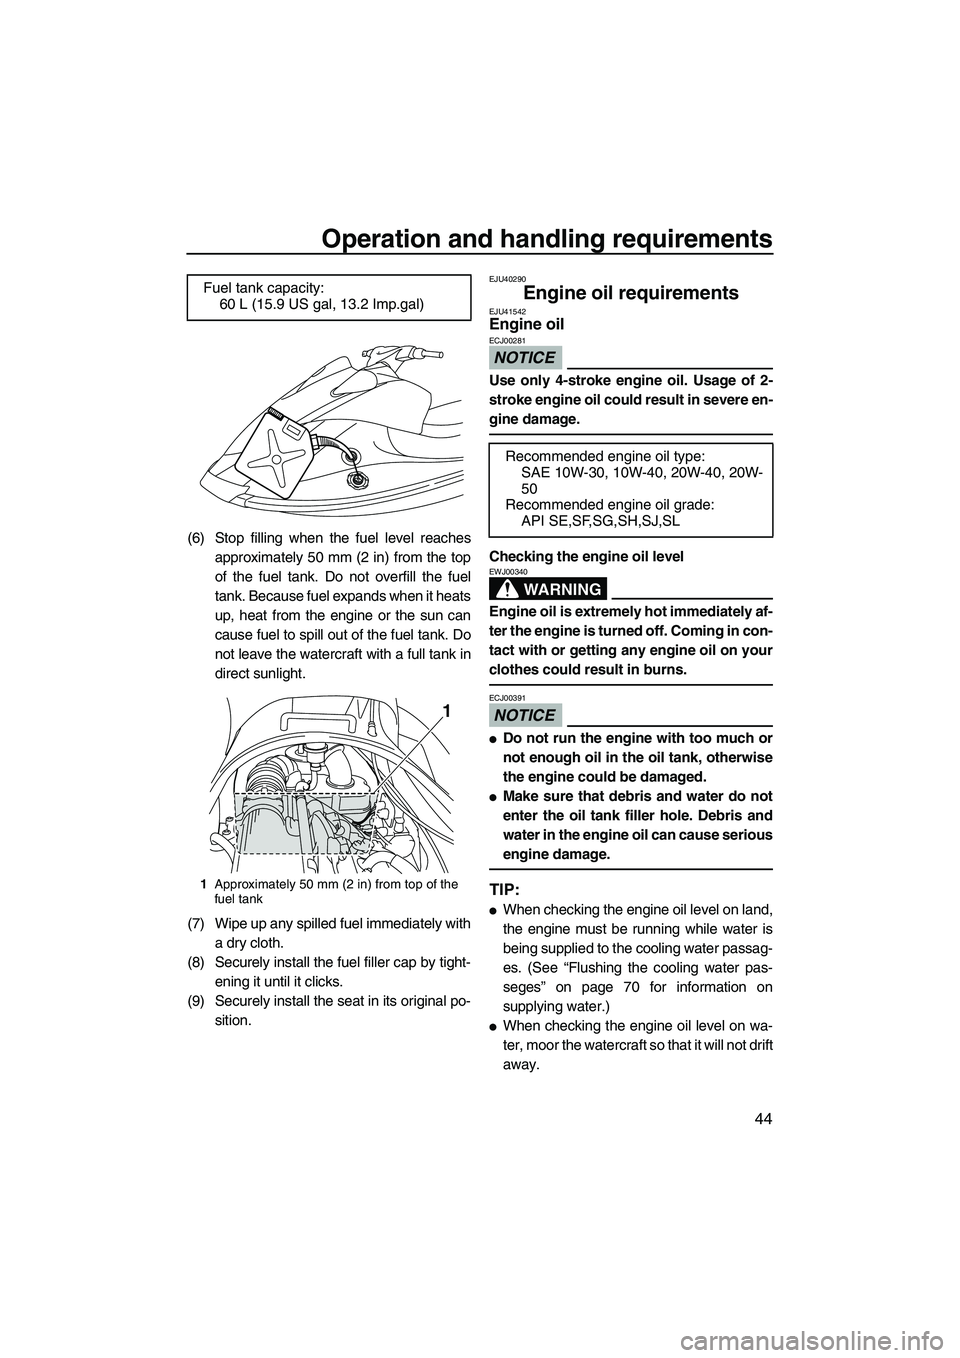 YAMAHA VX SPORT 2010  Owners Manual Operation and handling requirements
44
(6) Stop filling when the fuel level reaches
approximately 50 mm (2 in) from the top
of the fuel tank. Do not overfill the fuel
tank. Because fuel expands when i